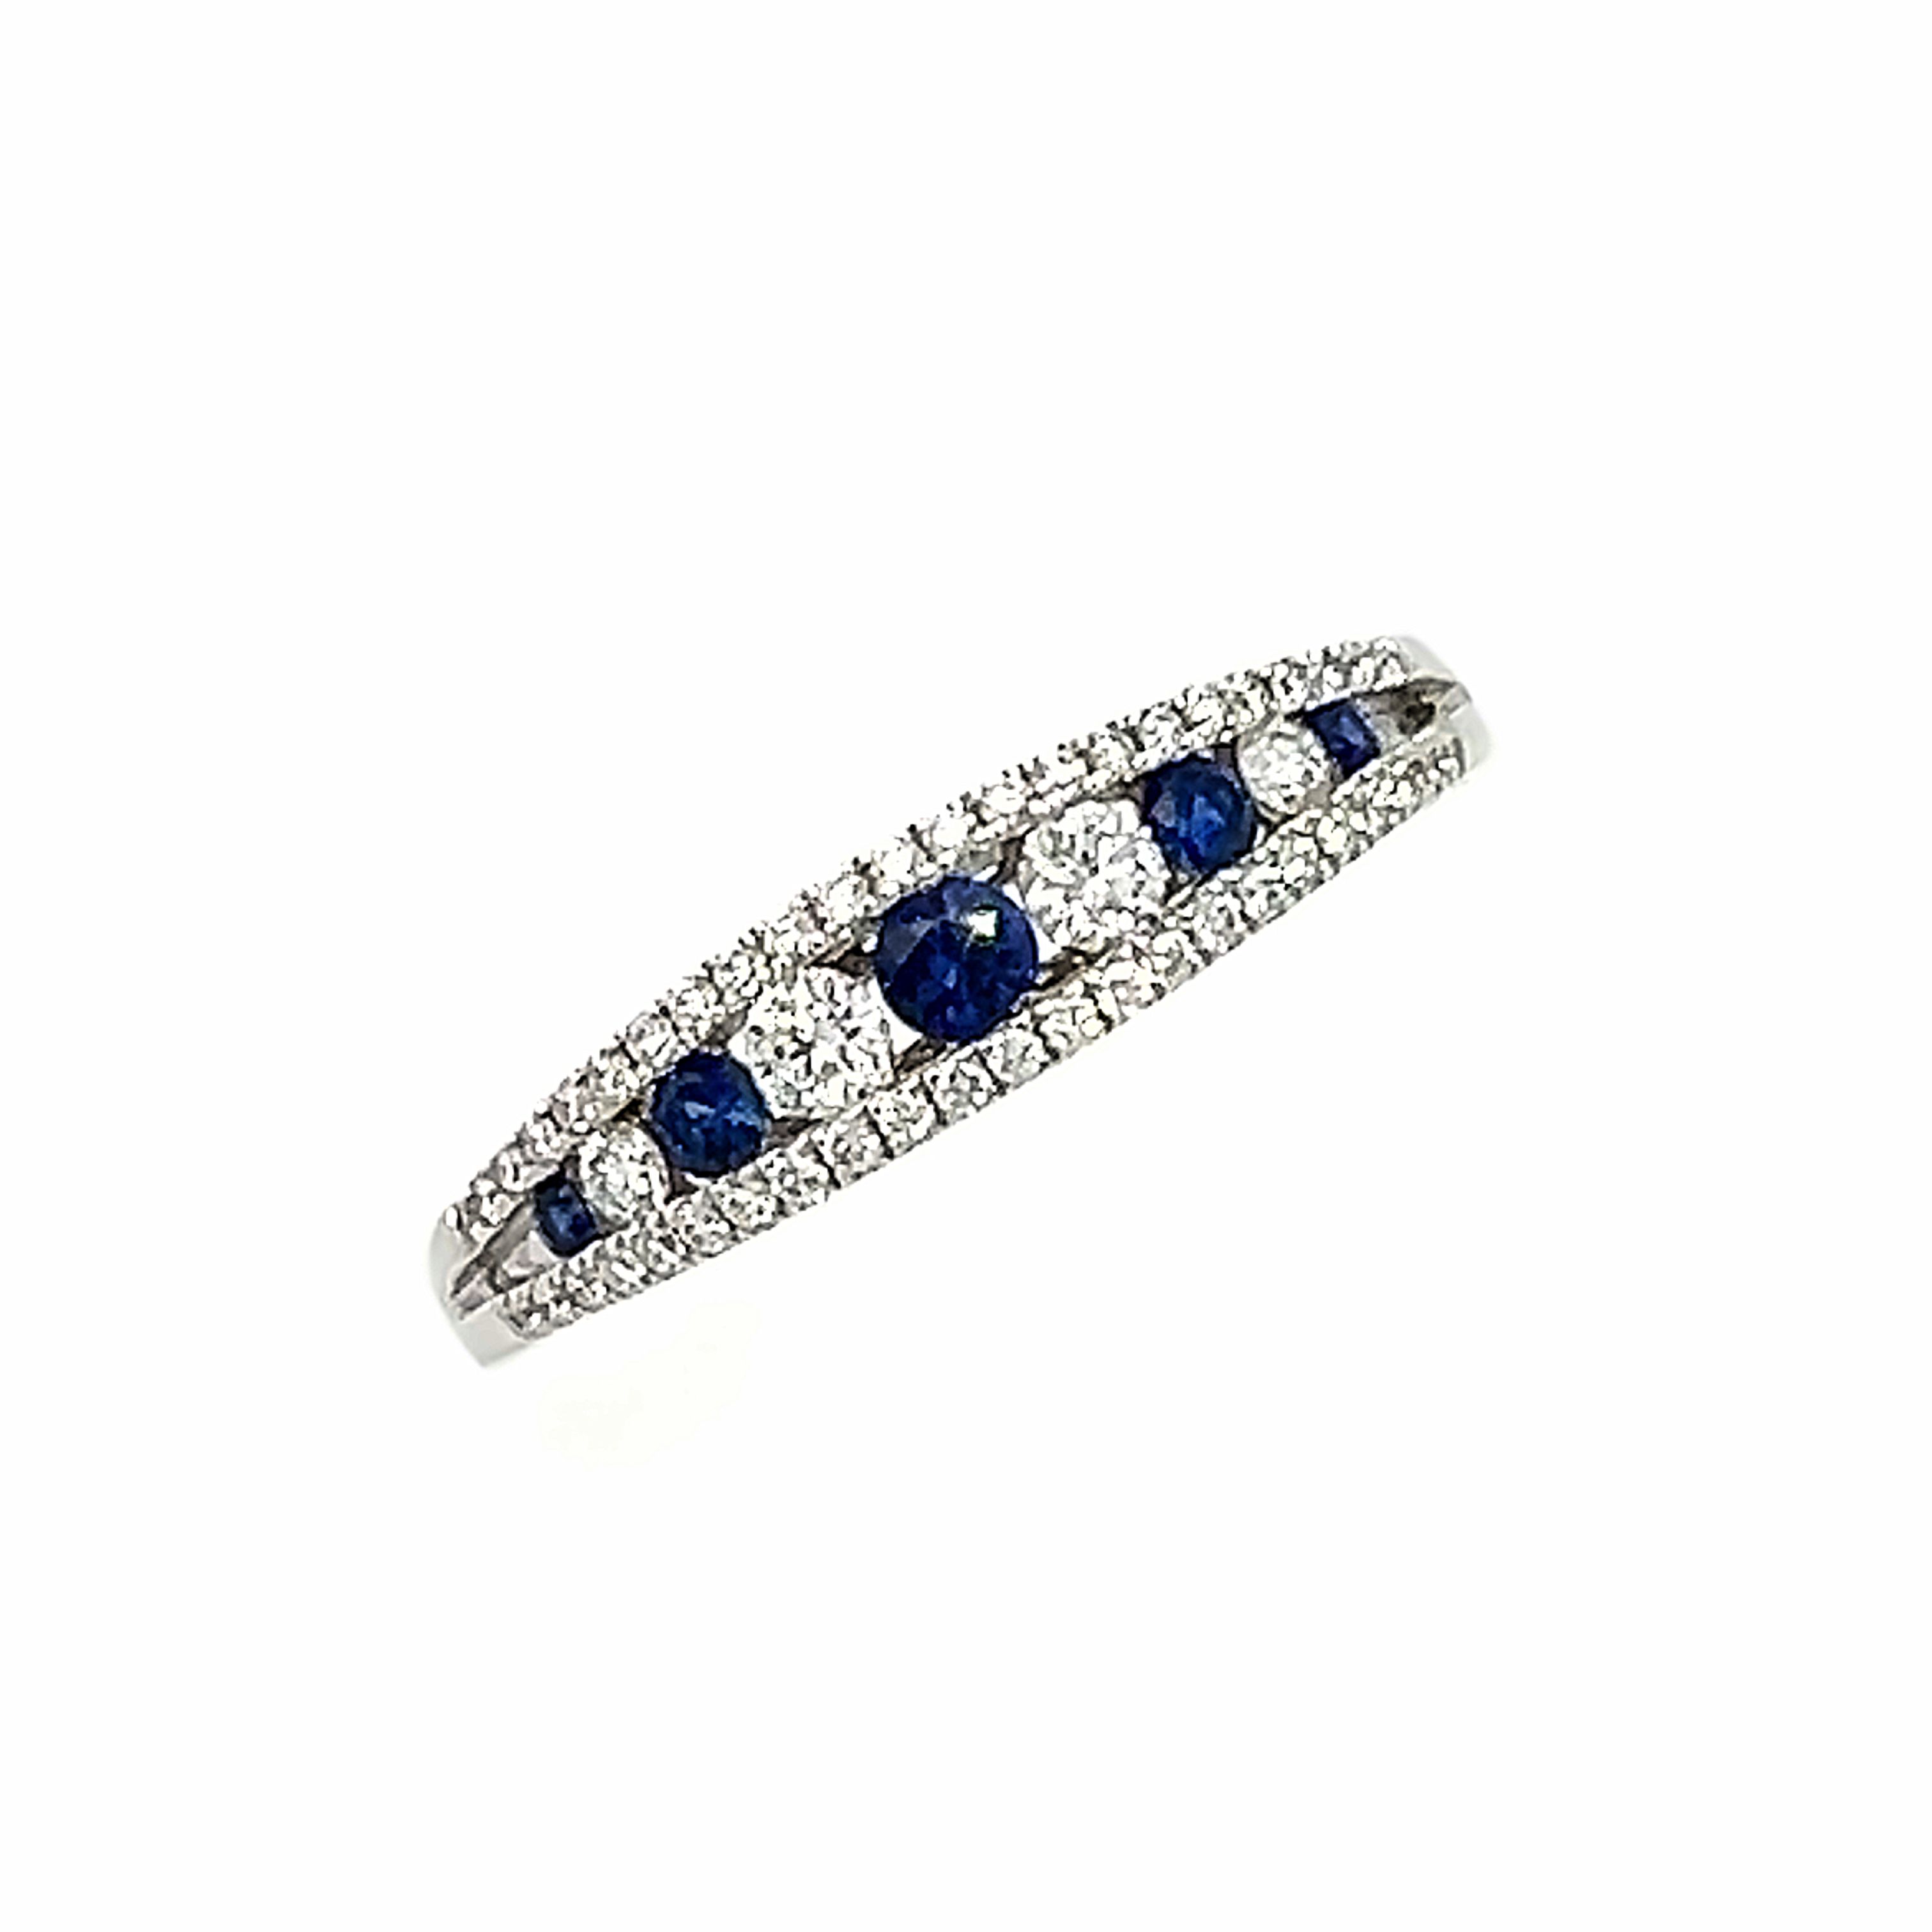 A Sapphire and Diamond Ring in 18 Carat White Gold